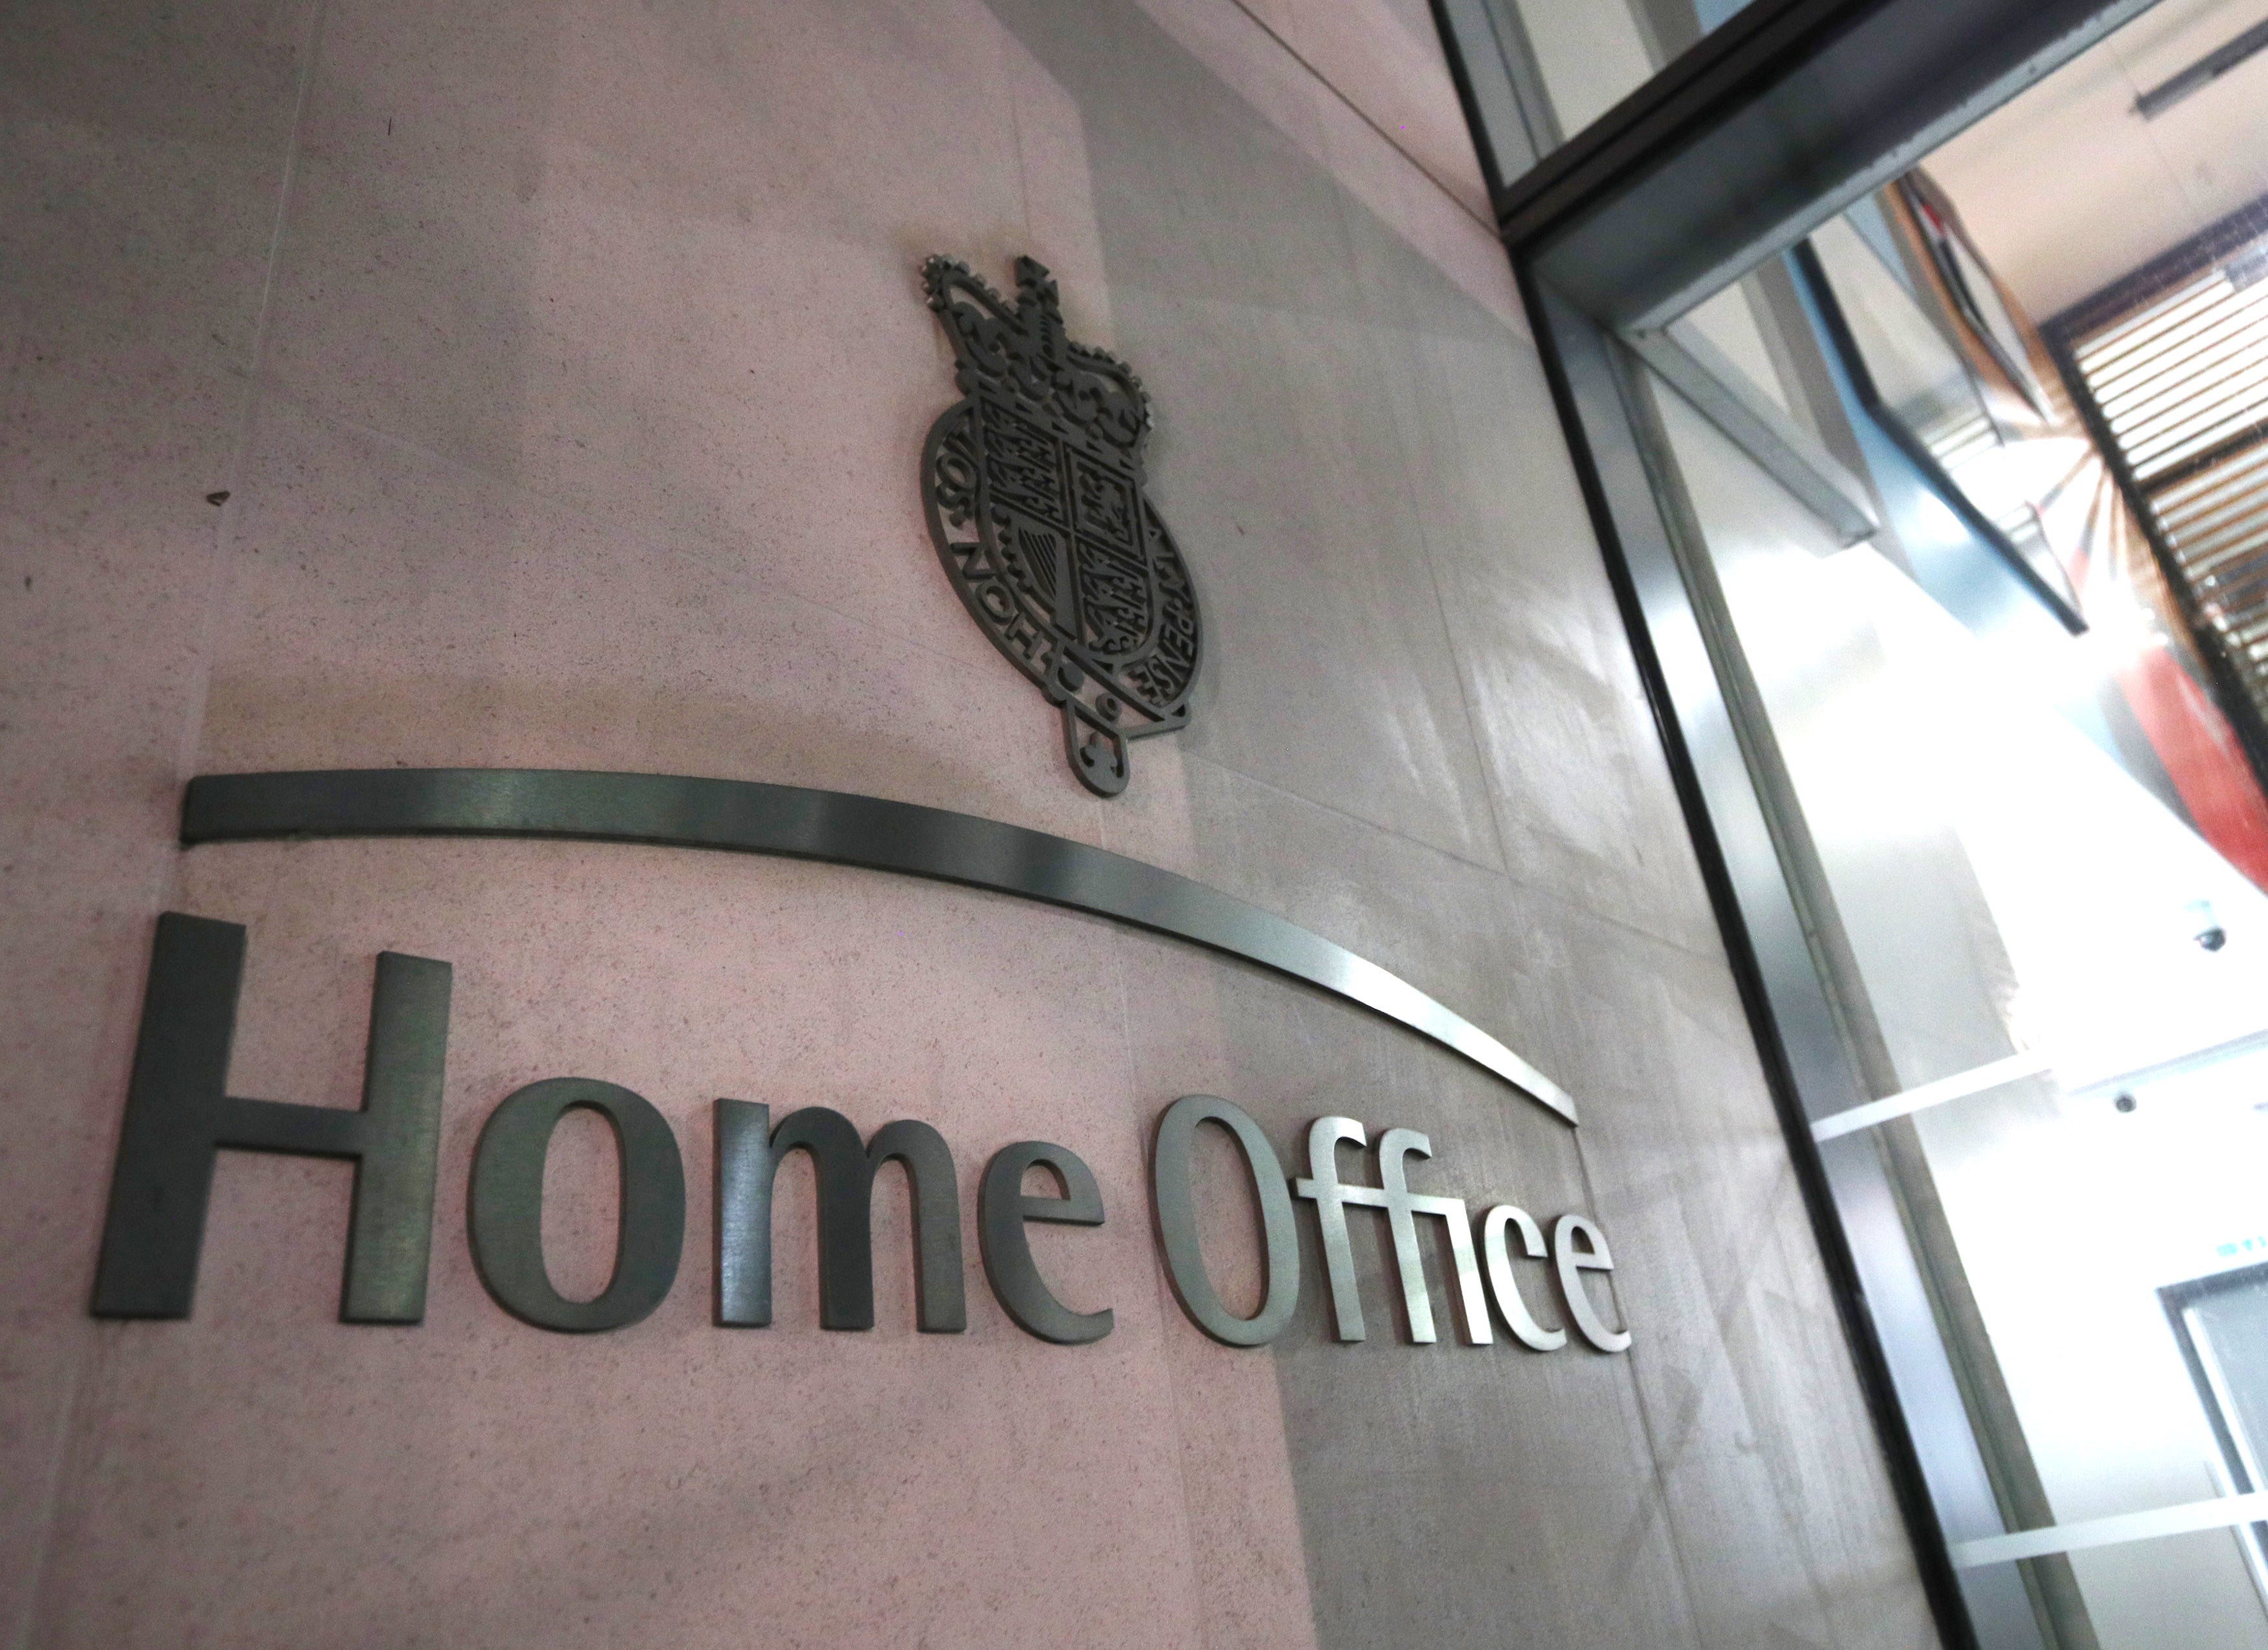 The Home Office said it remained absolutely committed to righting the wrongs of the Windrush scandal